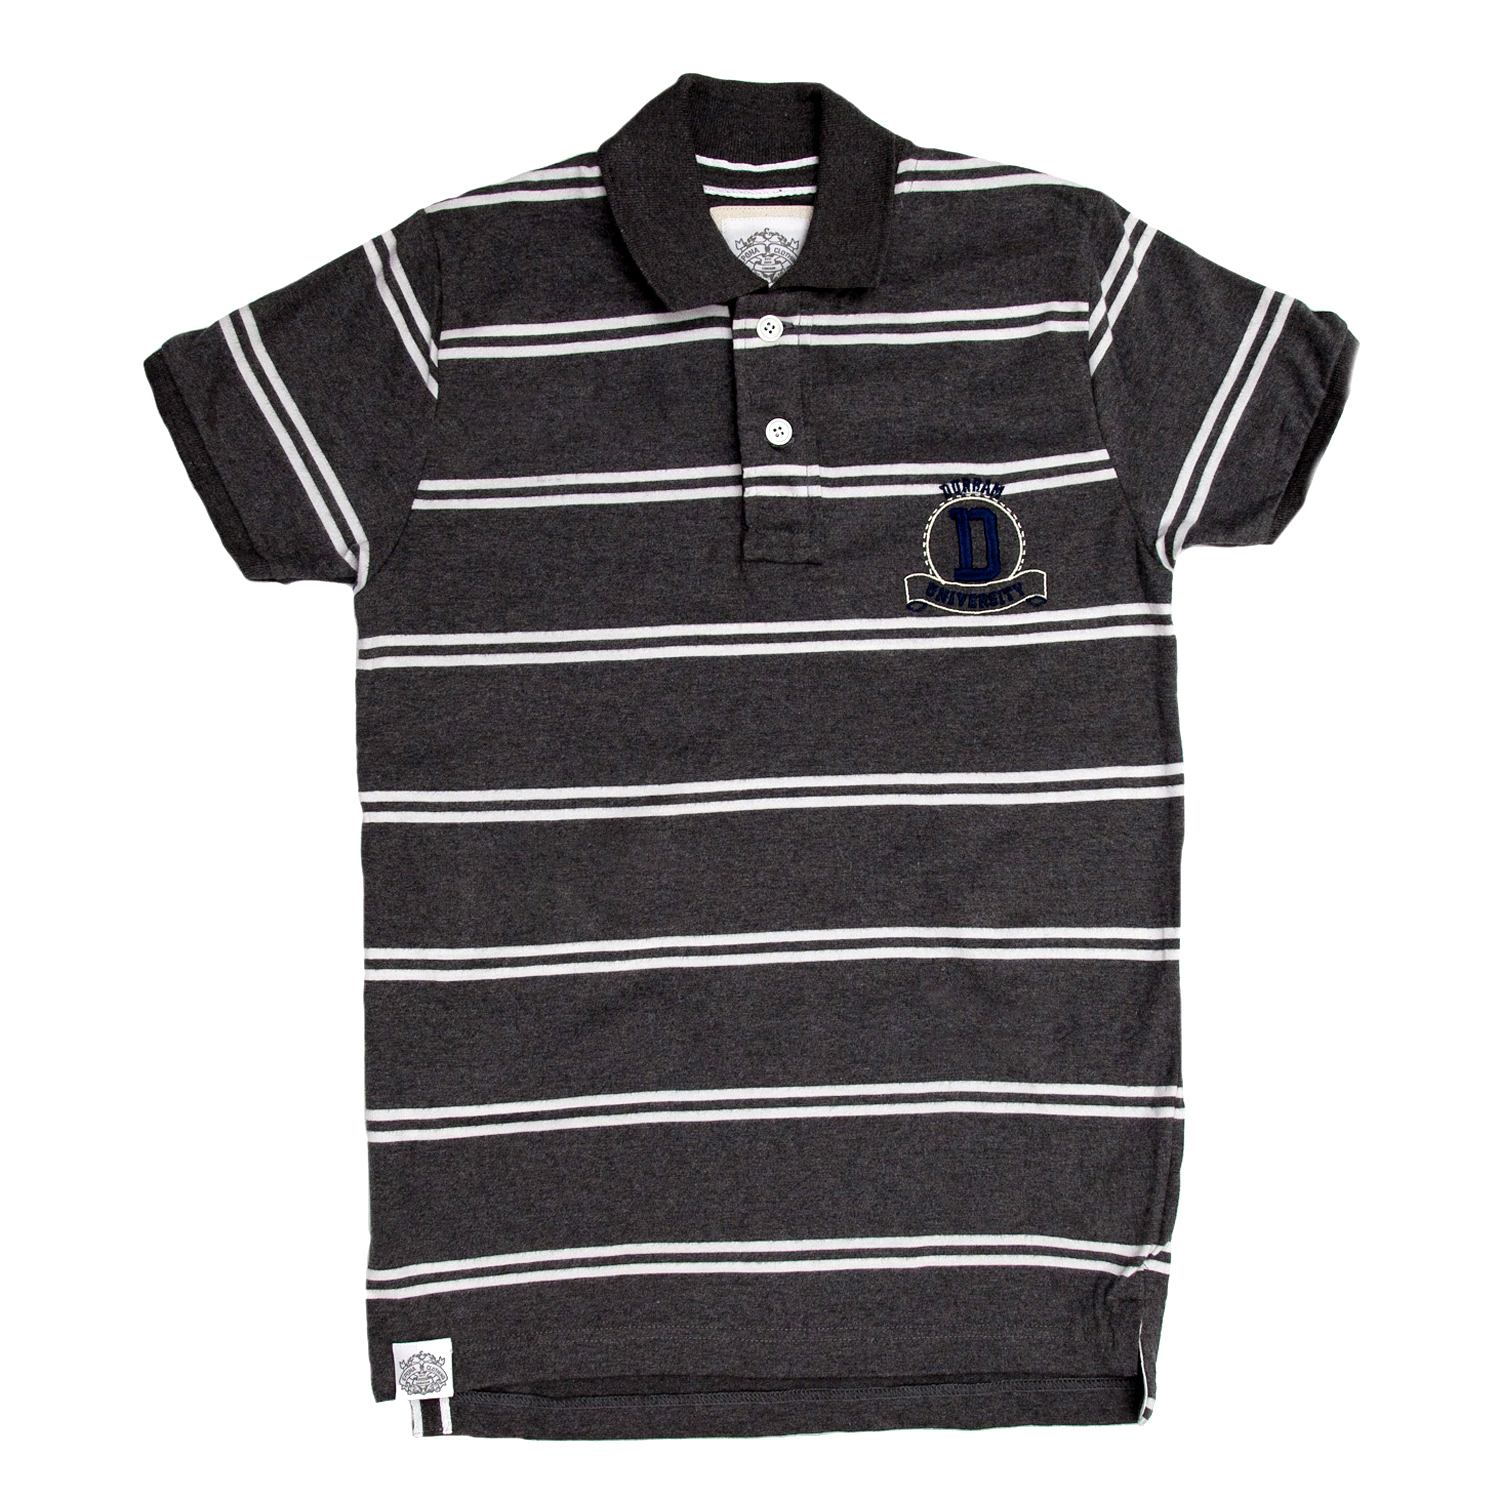 Cotton Striped polo in dark grey at Durham University Official Shop